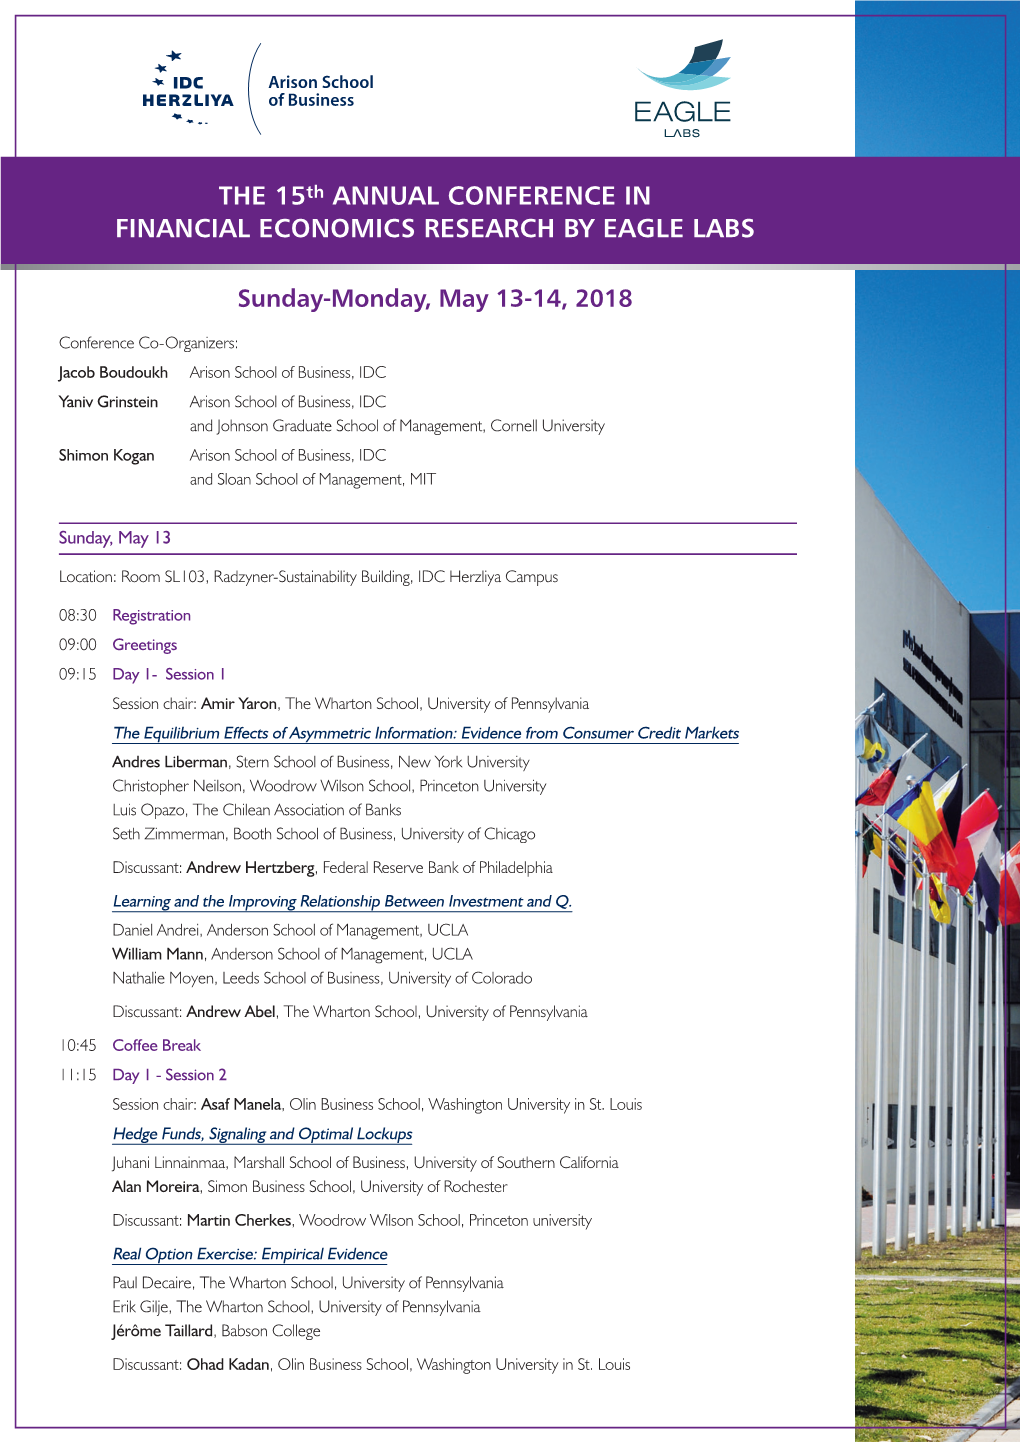 THE 15Th ANNUAL CONFERENCE in FINANCIAL ECONOMICS RESEARCH by EAGLE LABS